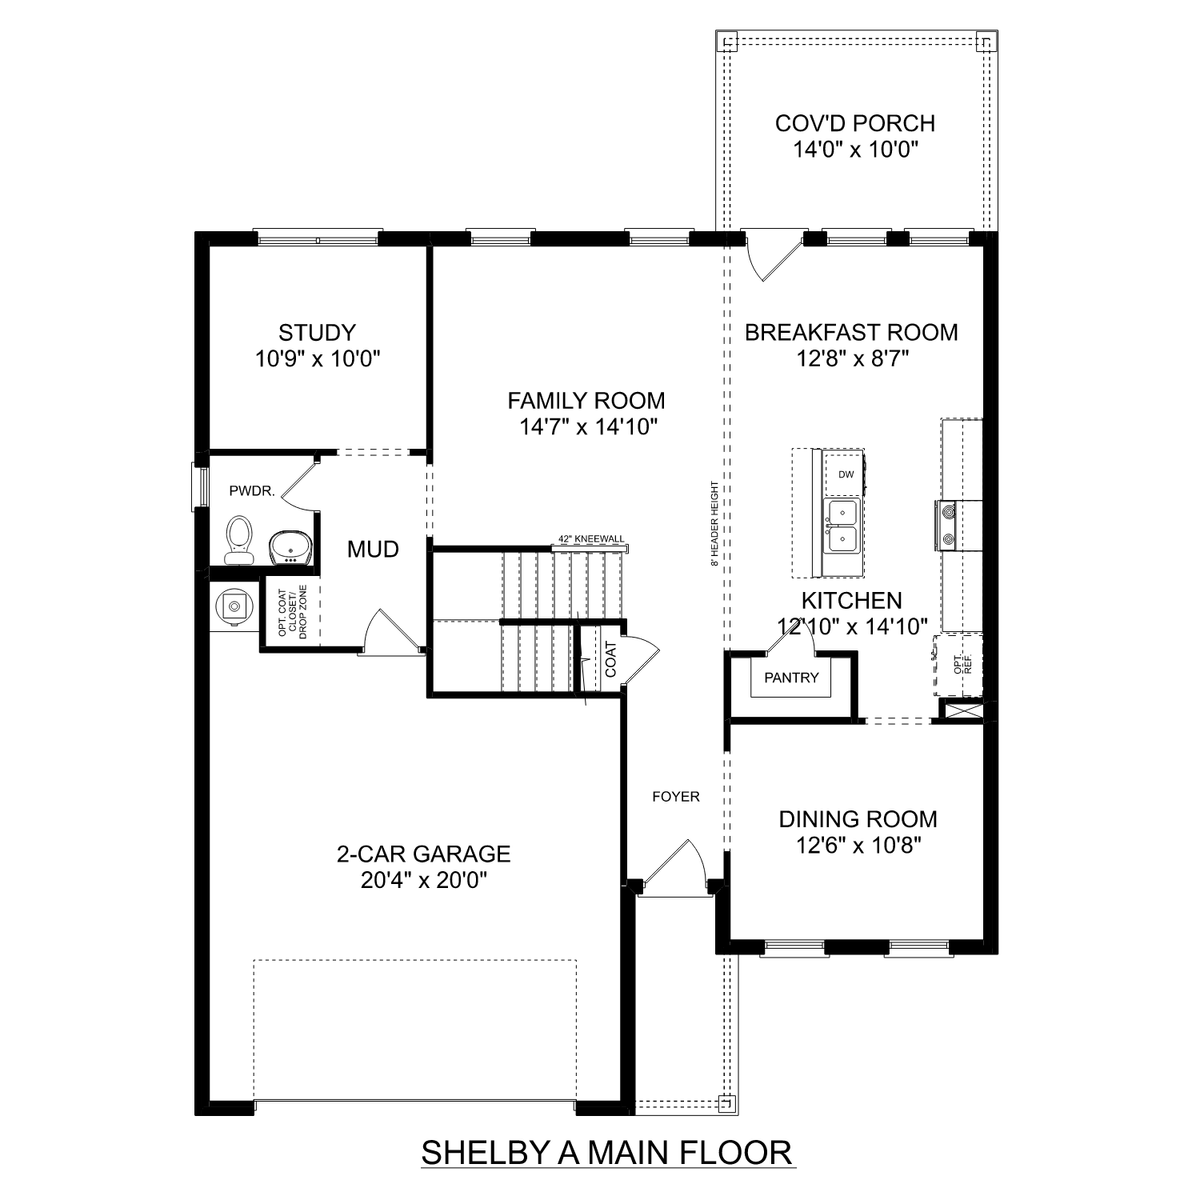 1 - The Shelby A buildable floor plan layout in Davidson Homes' Hollon Meadows community.